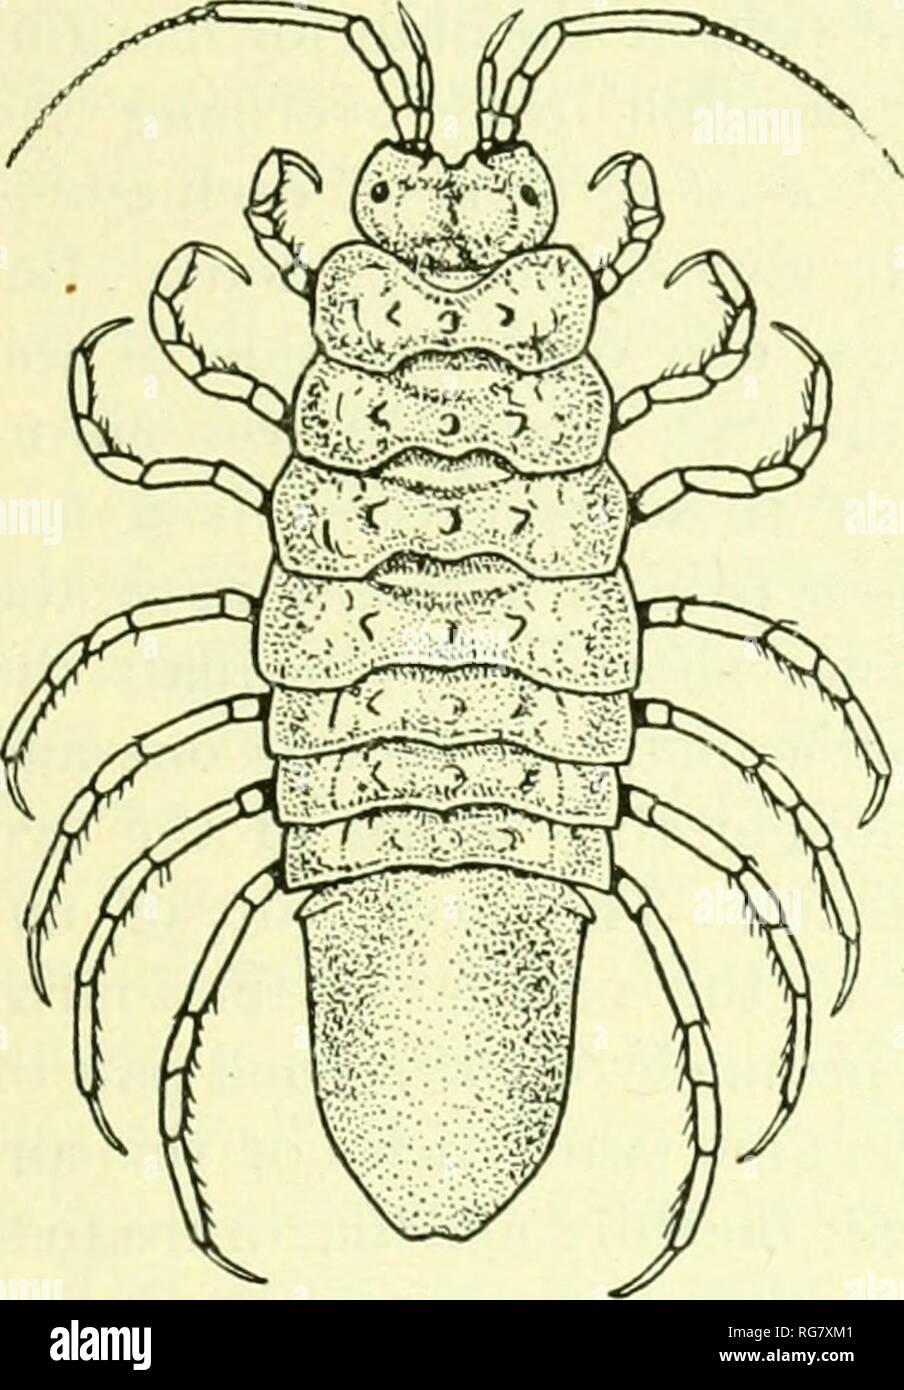 . Bulletin - United States National Museum. Science. ISOPODS OF NORTH AMERICA. 379 expansion, so that the}' secni more dorsal in position. The tirst anten- nffi have the basal article not enlarg'ed; the second is about equal in length to the tirst; the third and fourth are sube(jual, and each is al)Out one and a half times lonoer than the third. The tirst pair of anteniue extend to the end of the fourth peduncular article of the second pair of antenna'. The basal article of the second pair of antennie is almost in- conspicuous from a dorsal view; the second article is short; the third, fourth, Stock Photo